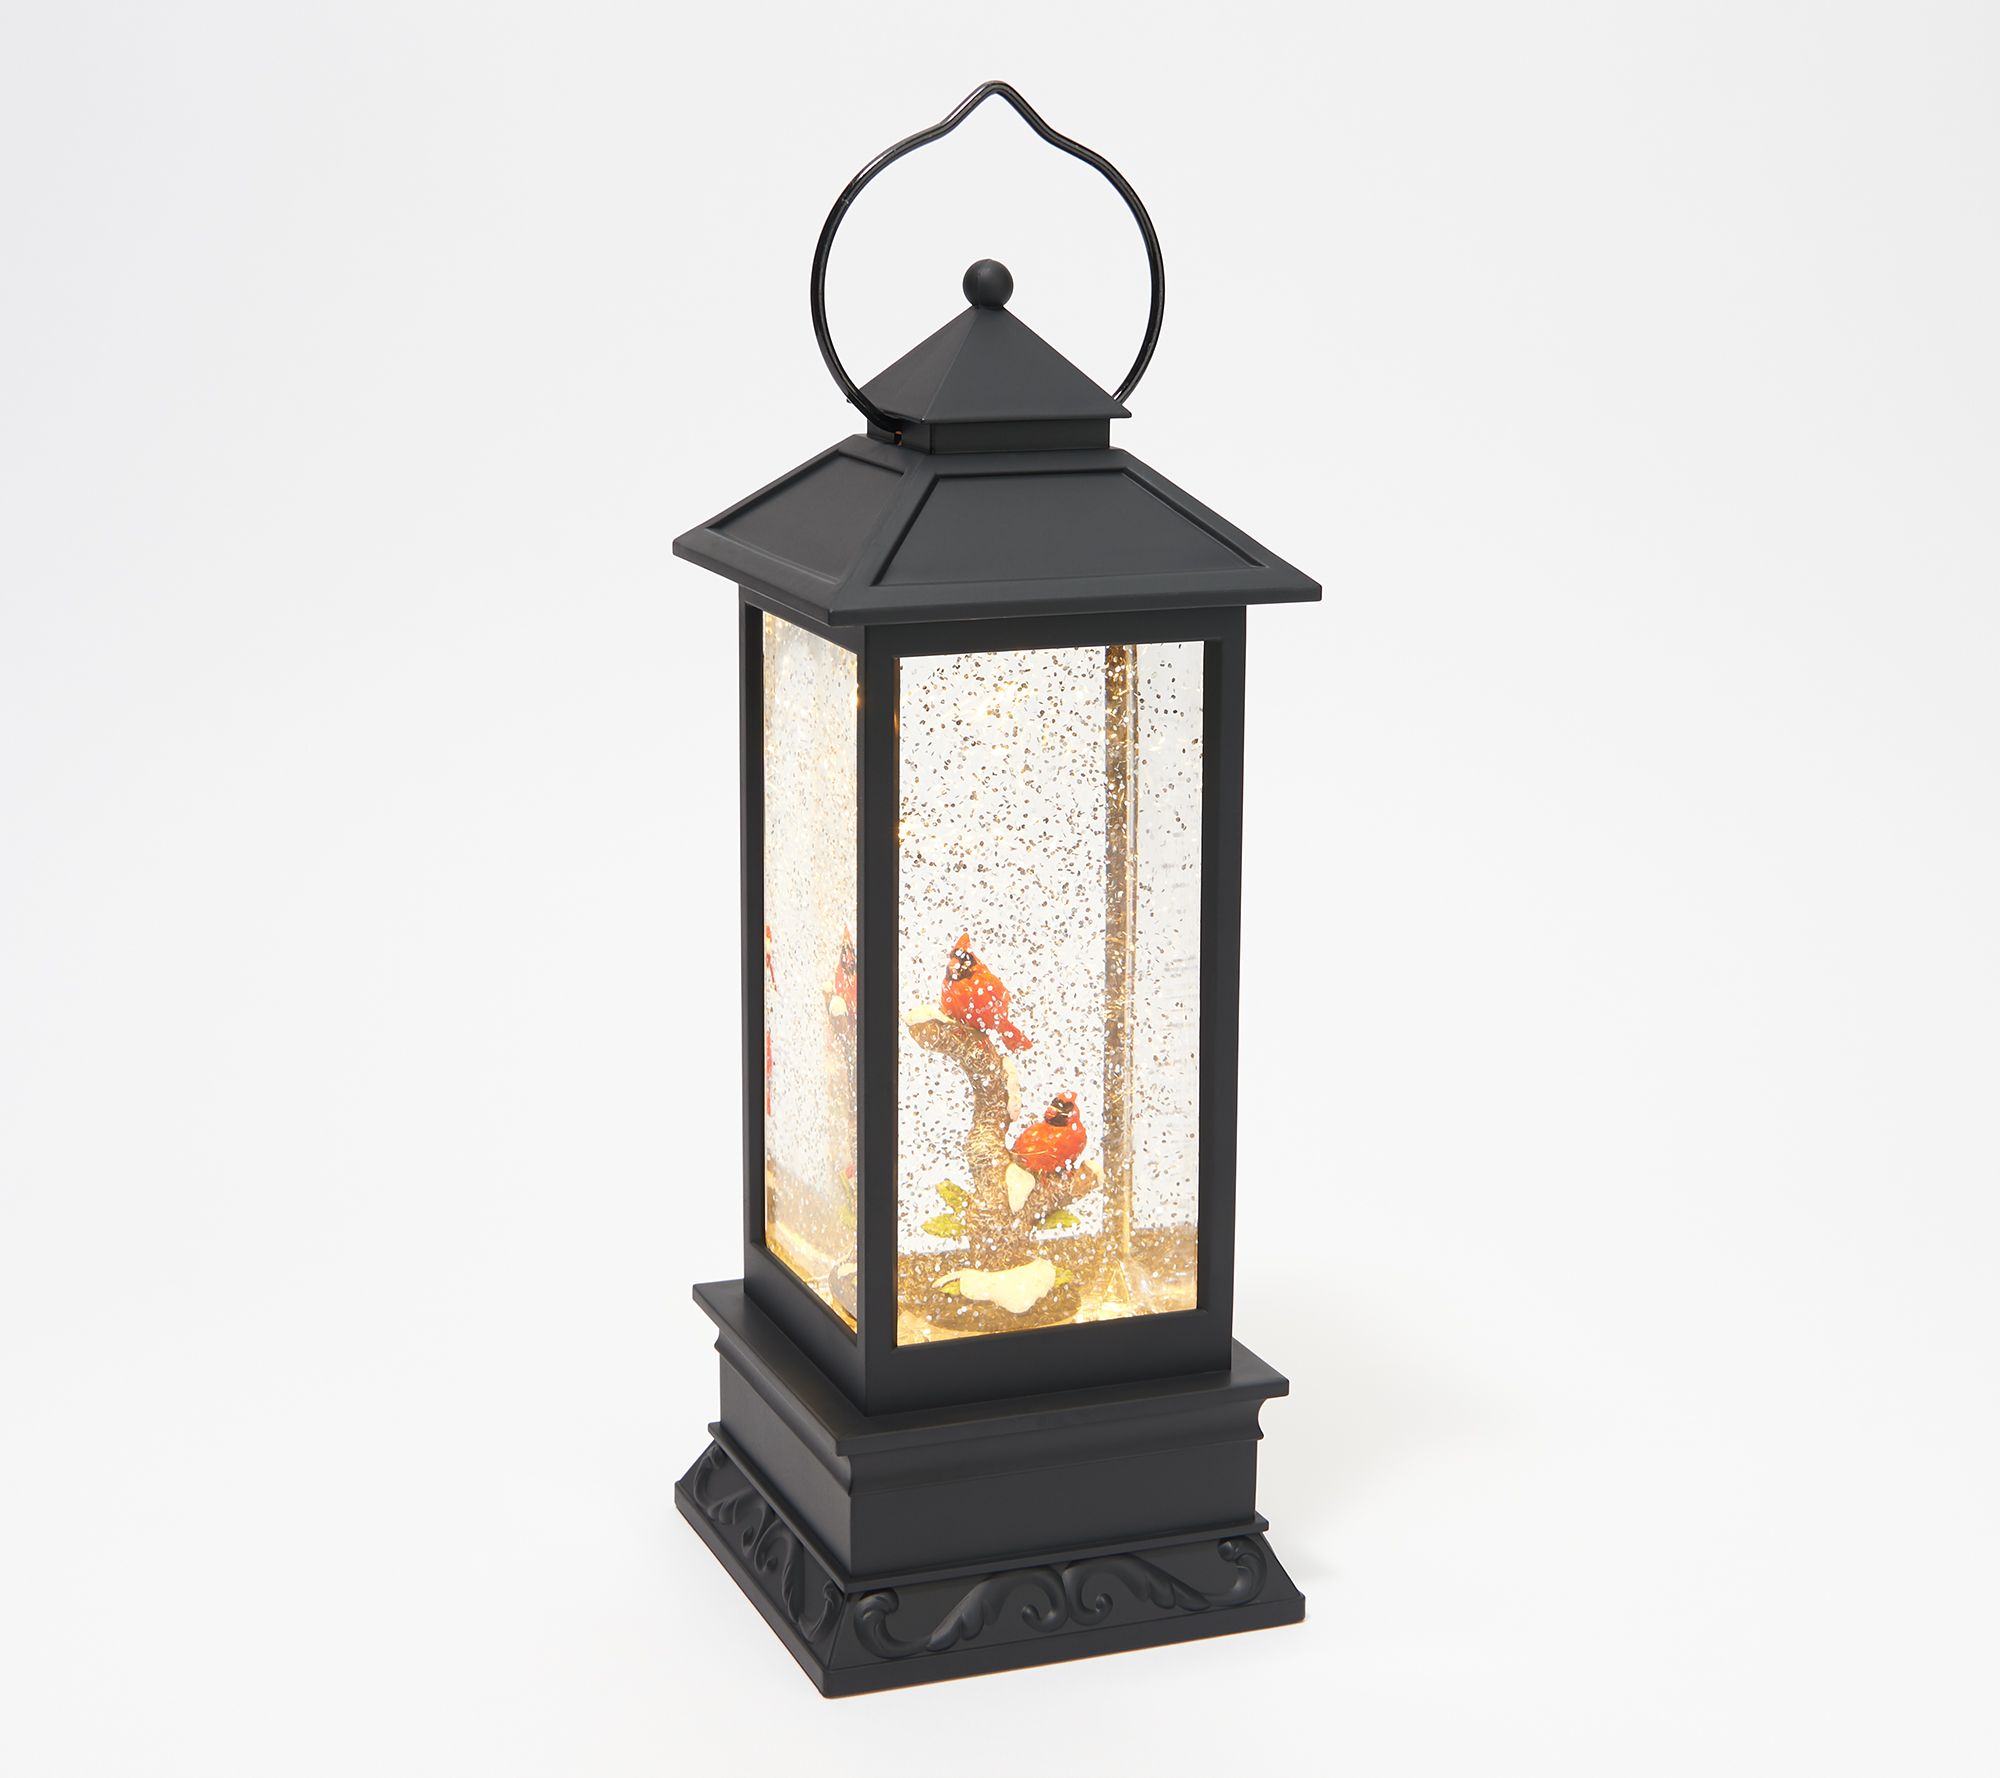 Illuminated Color Changing Water Lantern w/Timer by Lori Greiner FLORAL BULB 